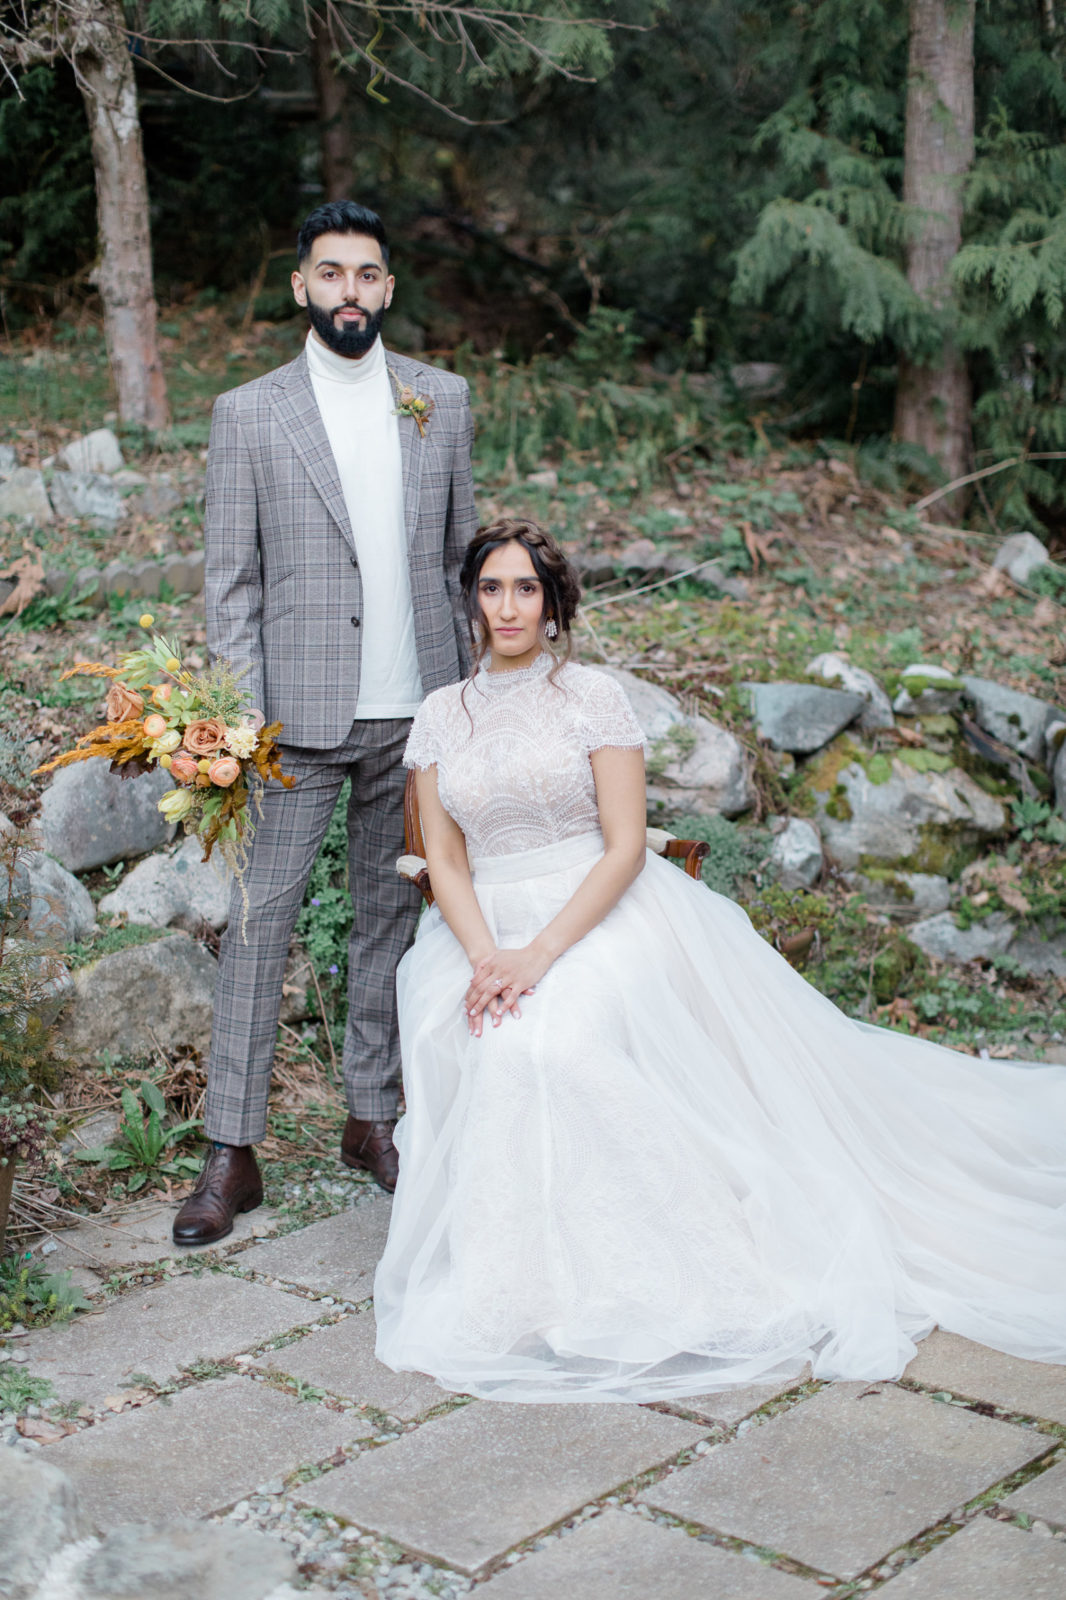 location: Abbotsford BC, whimsical, vintage meets modern, fall wedding inspiration,